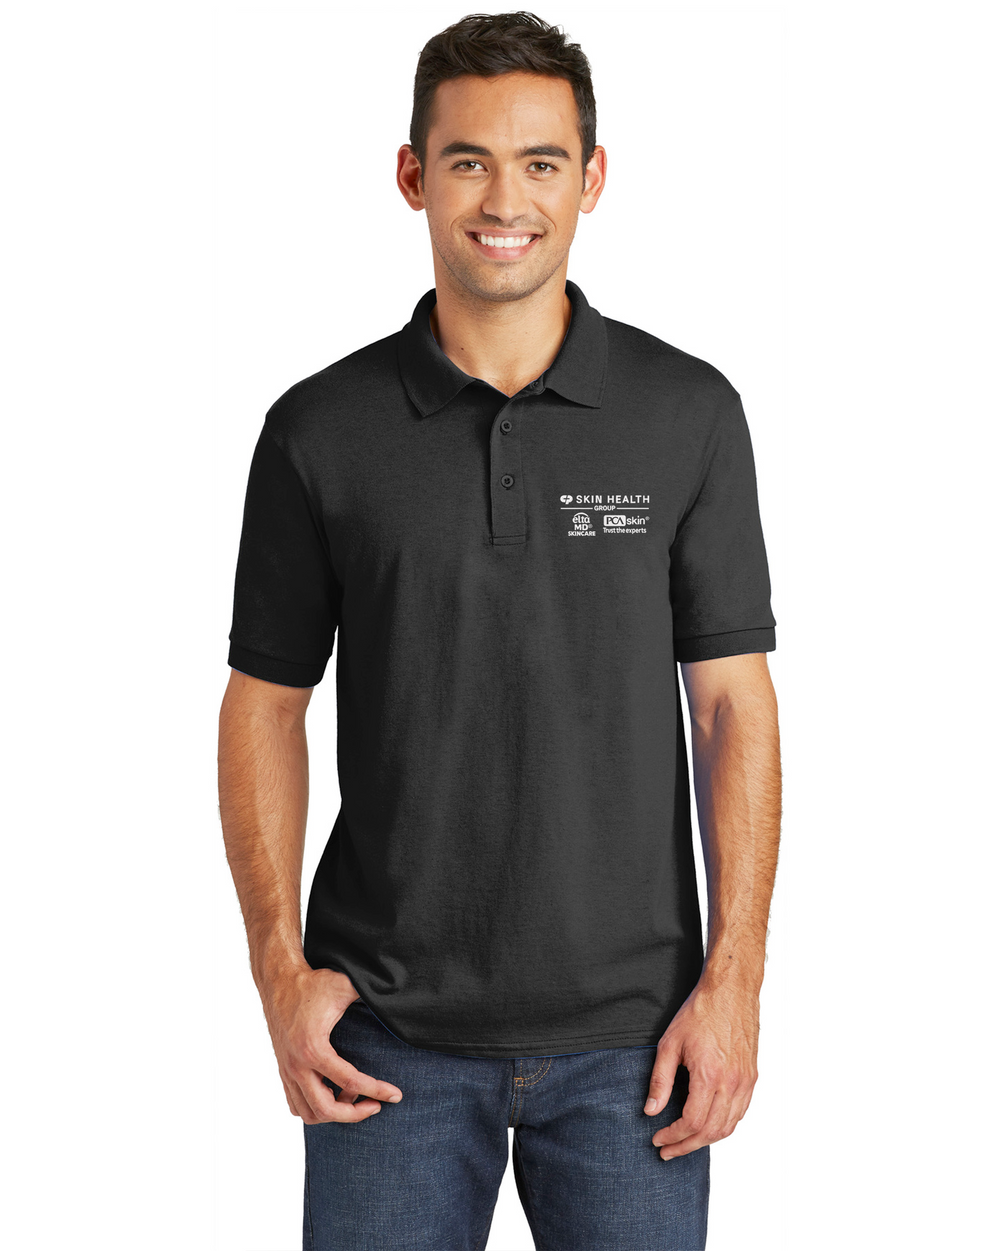 CP Skin Health Apparel - Port & Company Core Blend Jersey Knit Polo - KP55